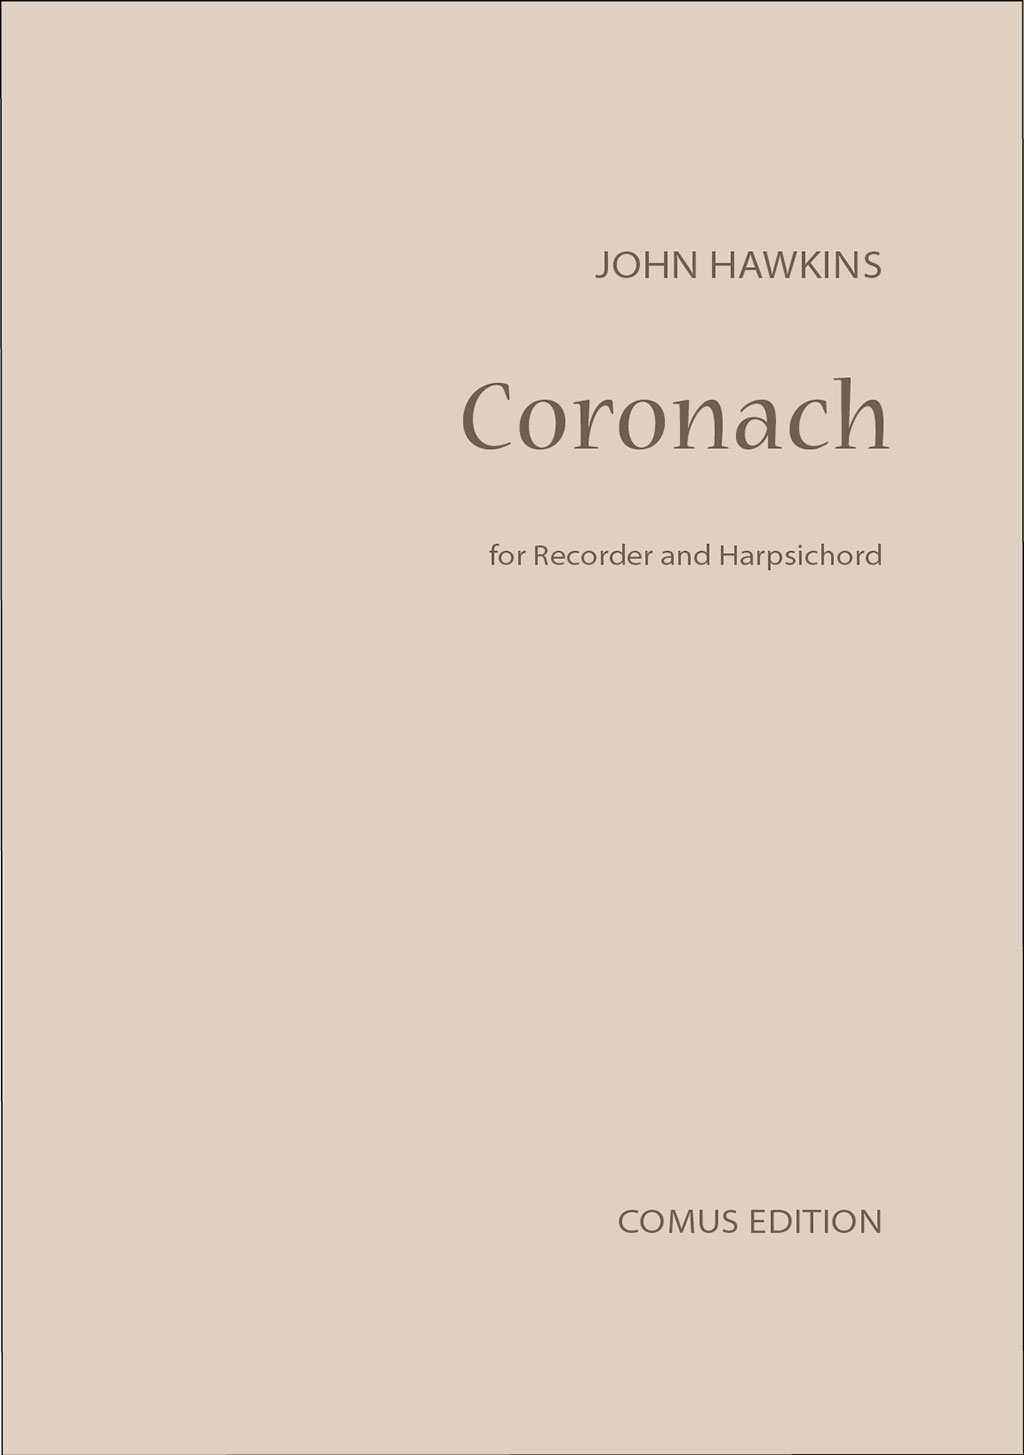 Outer cover of item Coronach